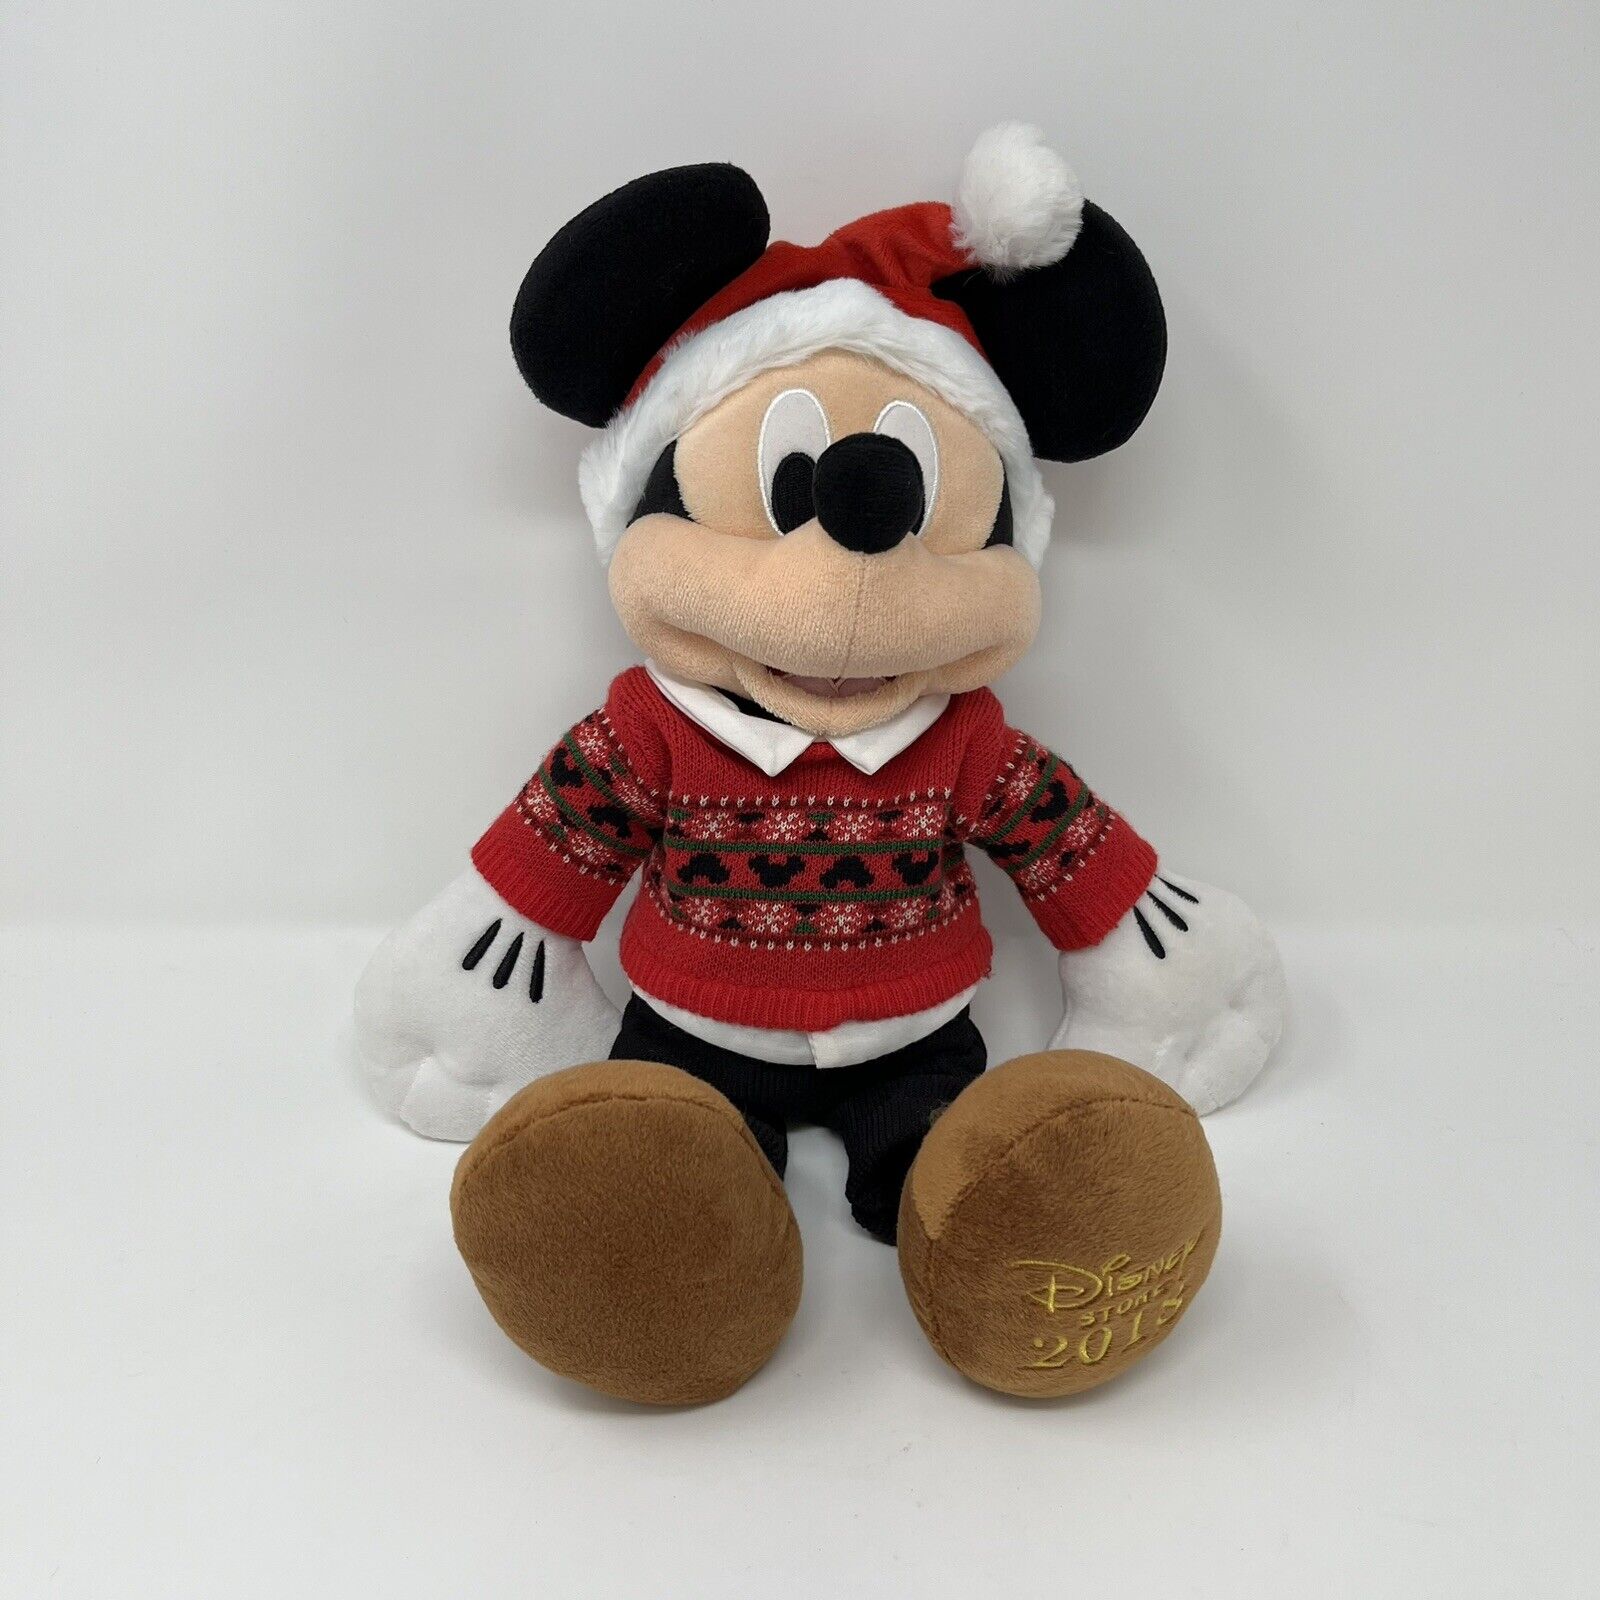 Disney Store Mickey Mouse Christmas Plush Toy Exclusive 2018 Limited New